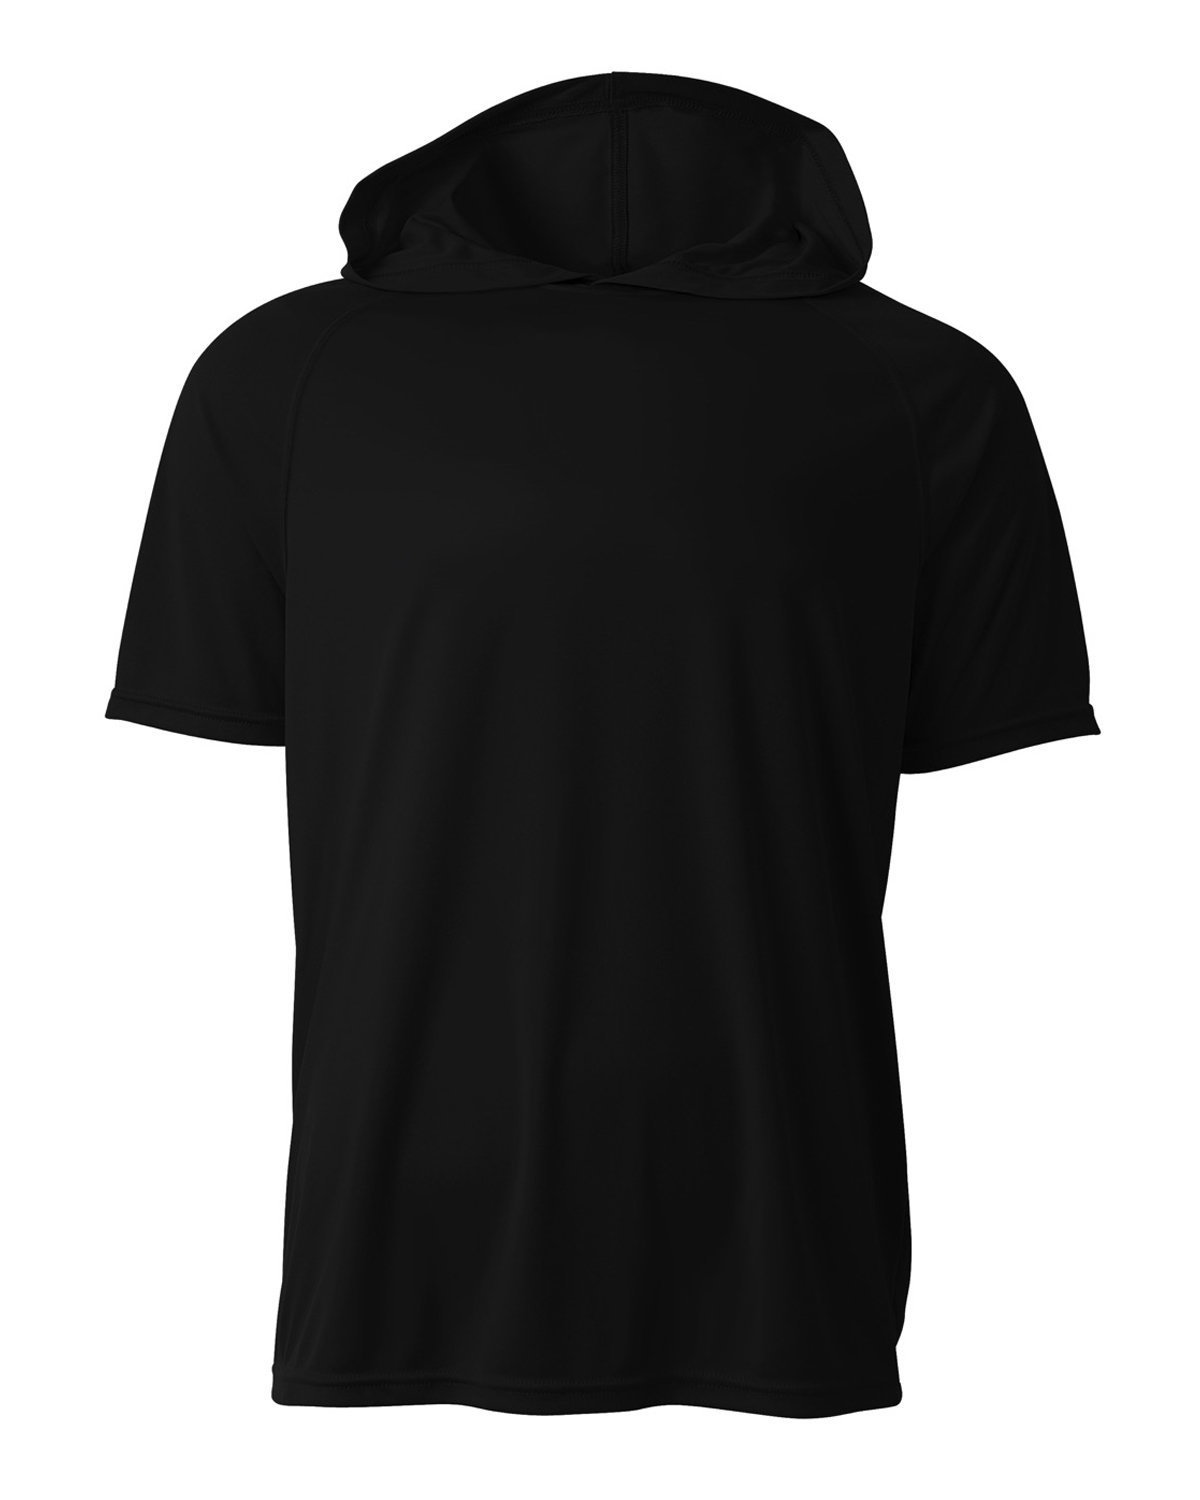 A4 Youth Hooded T-Shirt | alphabroder